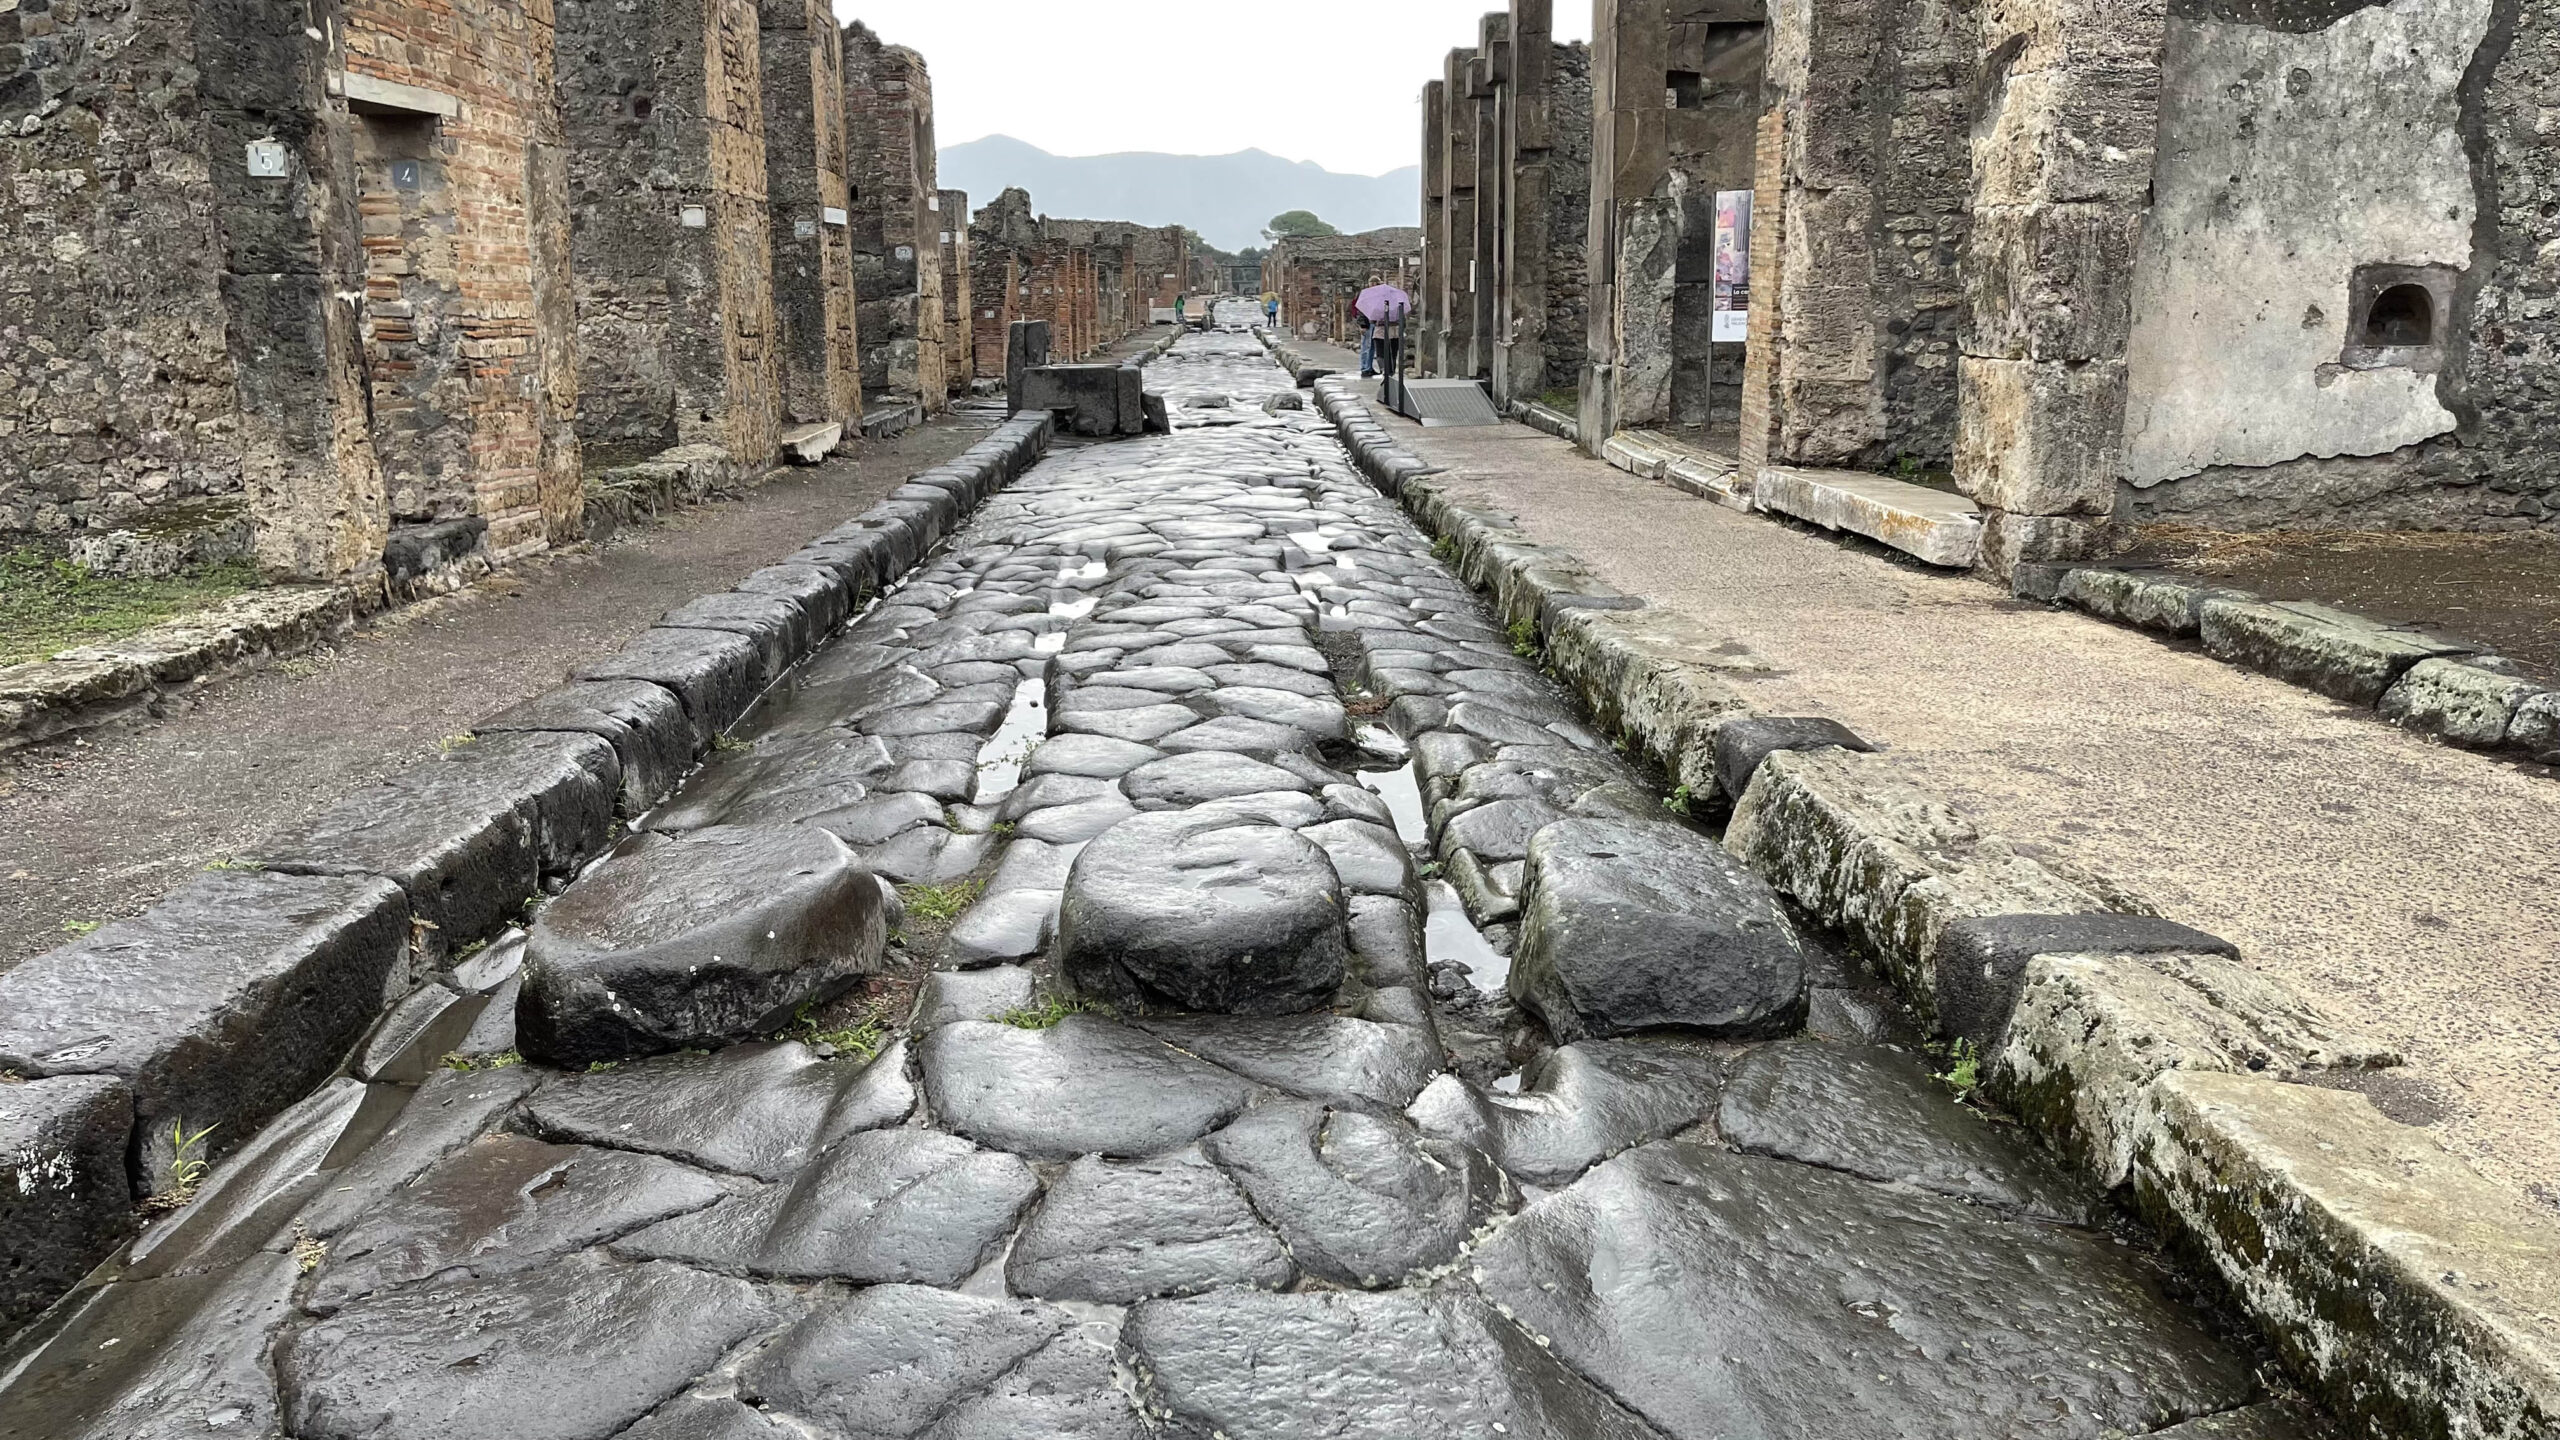 Dating Pompeii II: The Material Evidence